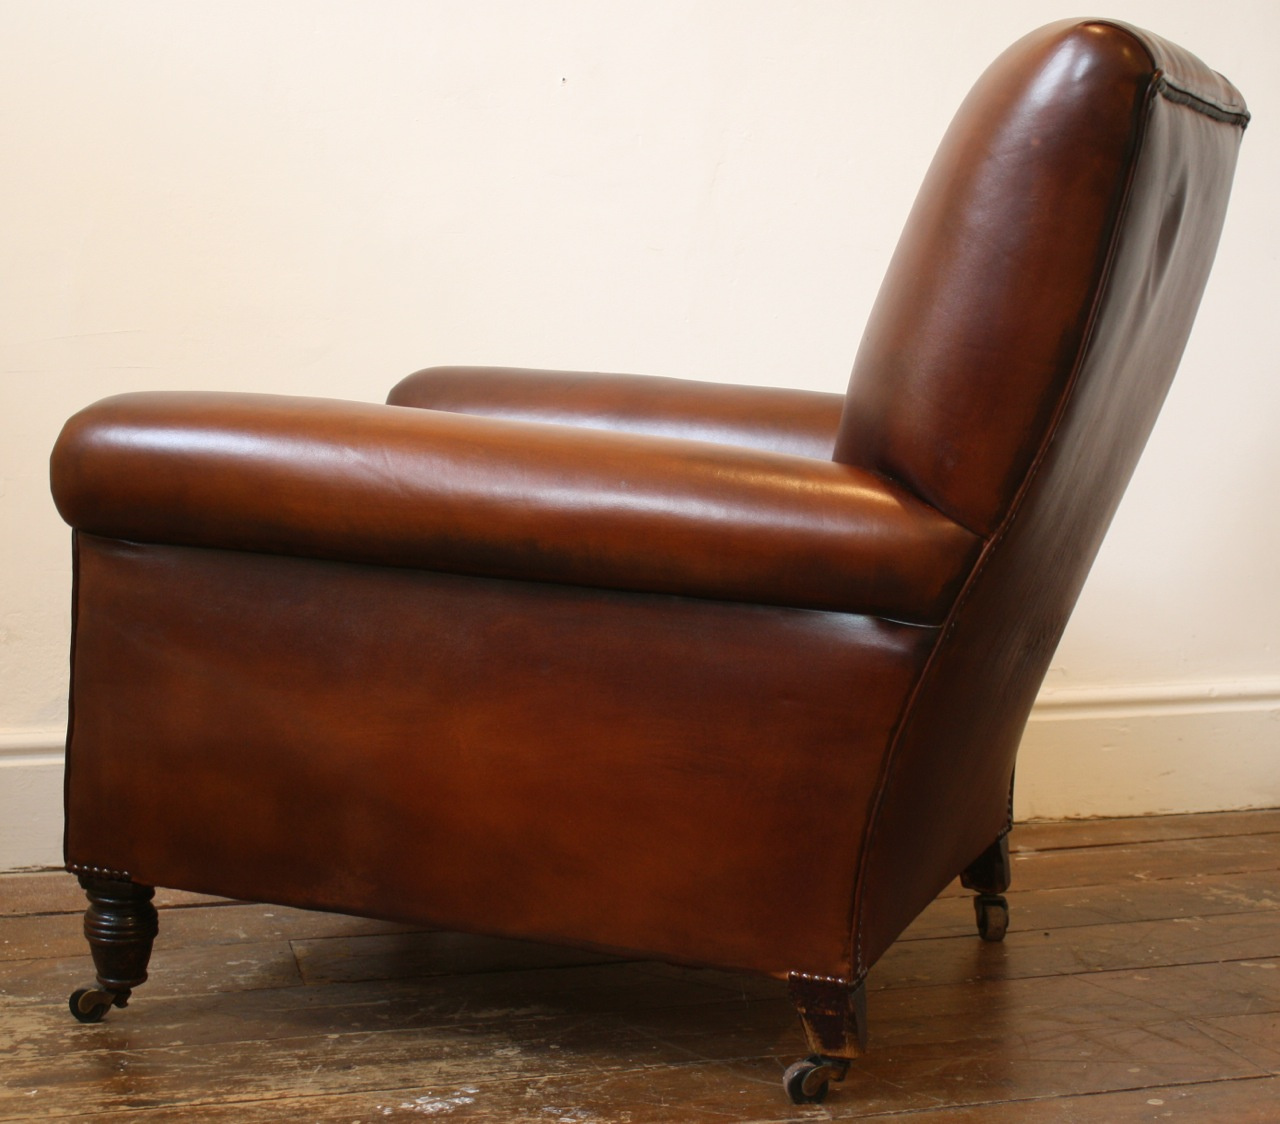 Reupholstered Leather Club Chair Antique Leather Chair English Leather